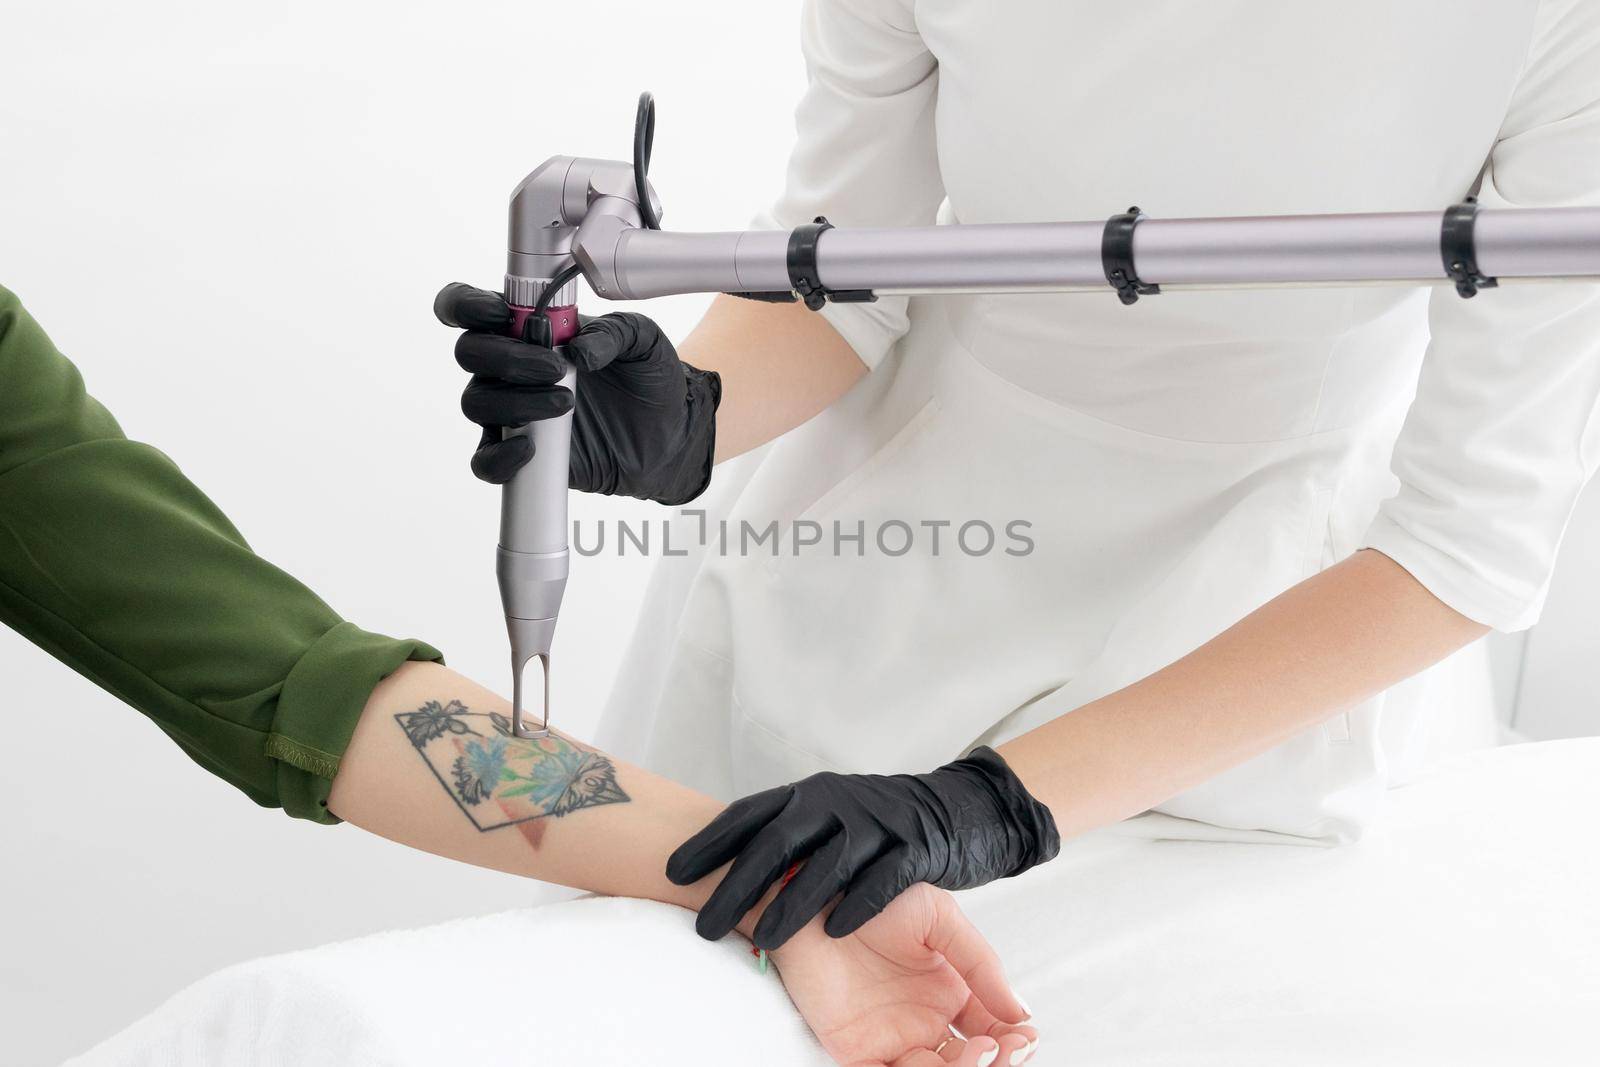 Beautician using laser device to remove an unwanted tattoo from female arm. Concept of erasing tattoos as expensive procedure in a cosmetology clinic